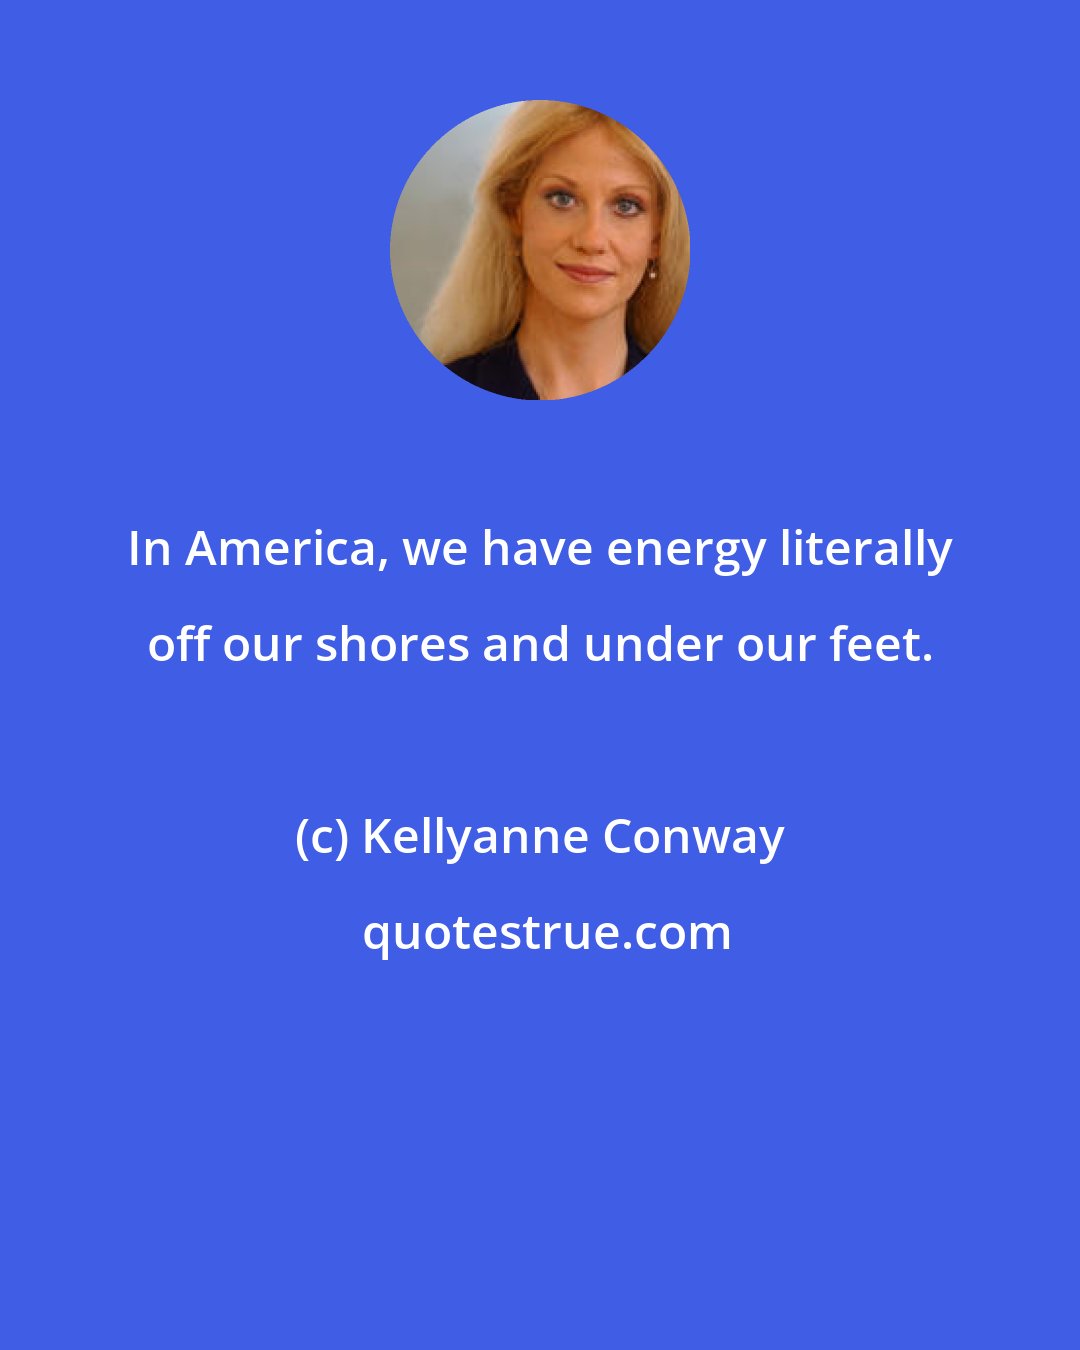 Kellyanne Conway: In America, we have energy literally off our shores and under our feet.